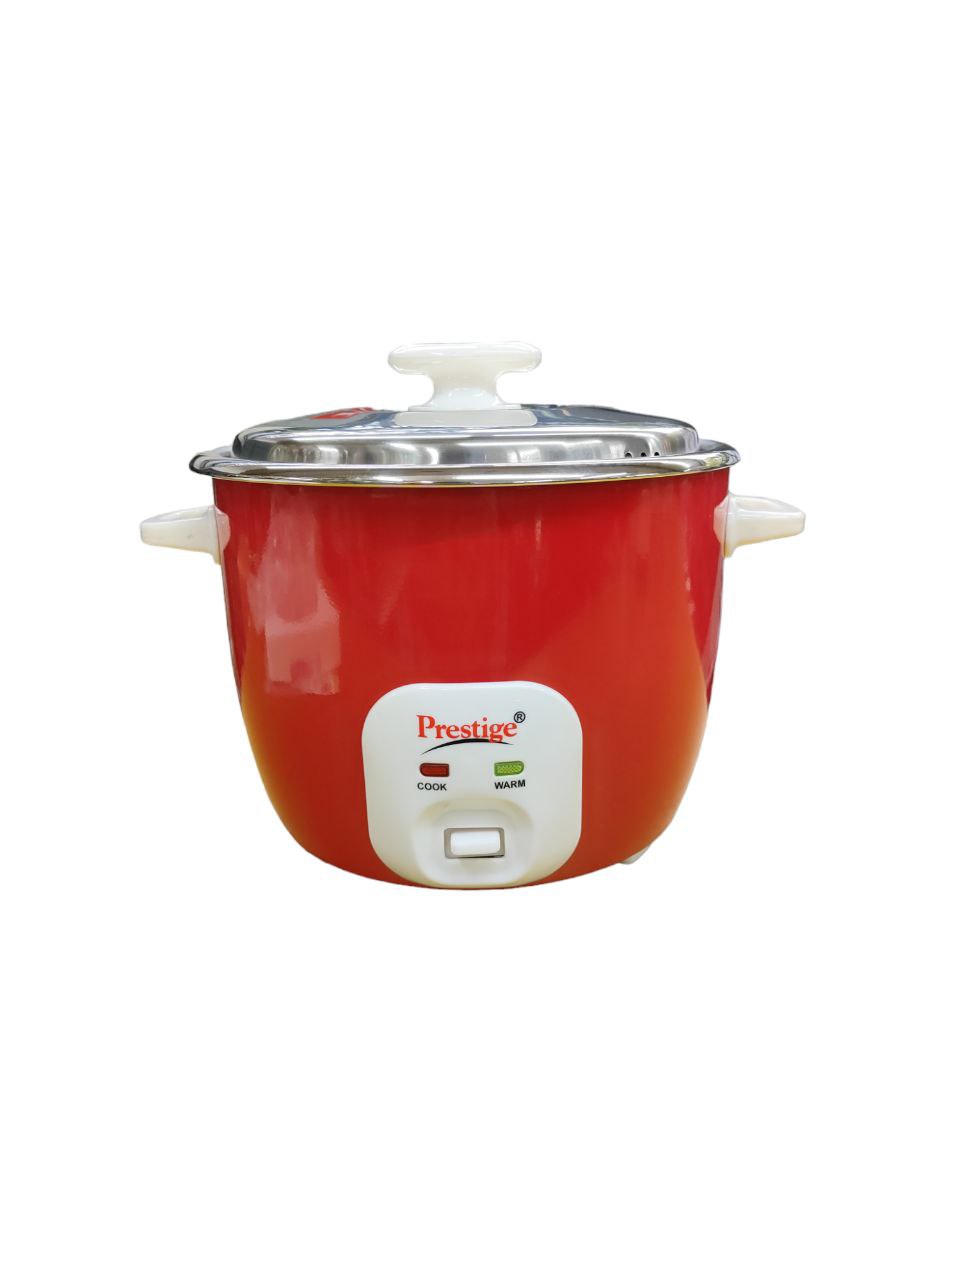 Prestige Delight Cute 1.8-SS Electric Rice Cooker | 1.8L Stainless Steel Pot, Keep-Warm Feature, Cool-Touch Handles | Versatile & Efficient Kitchen Essential